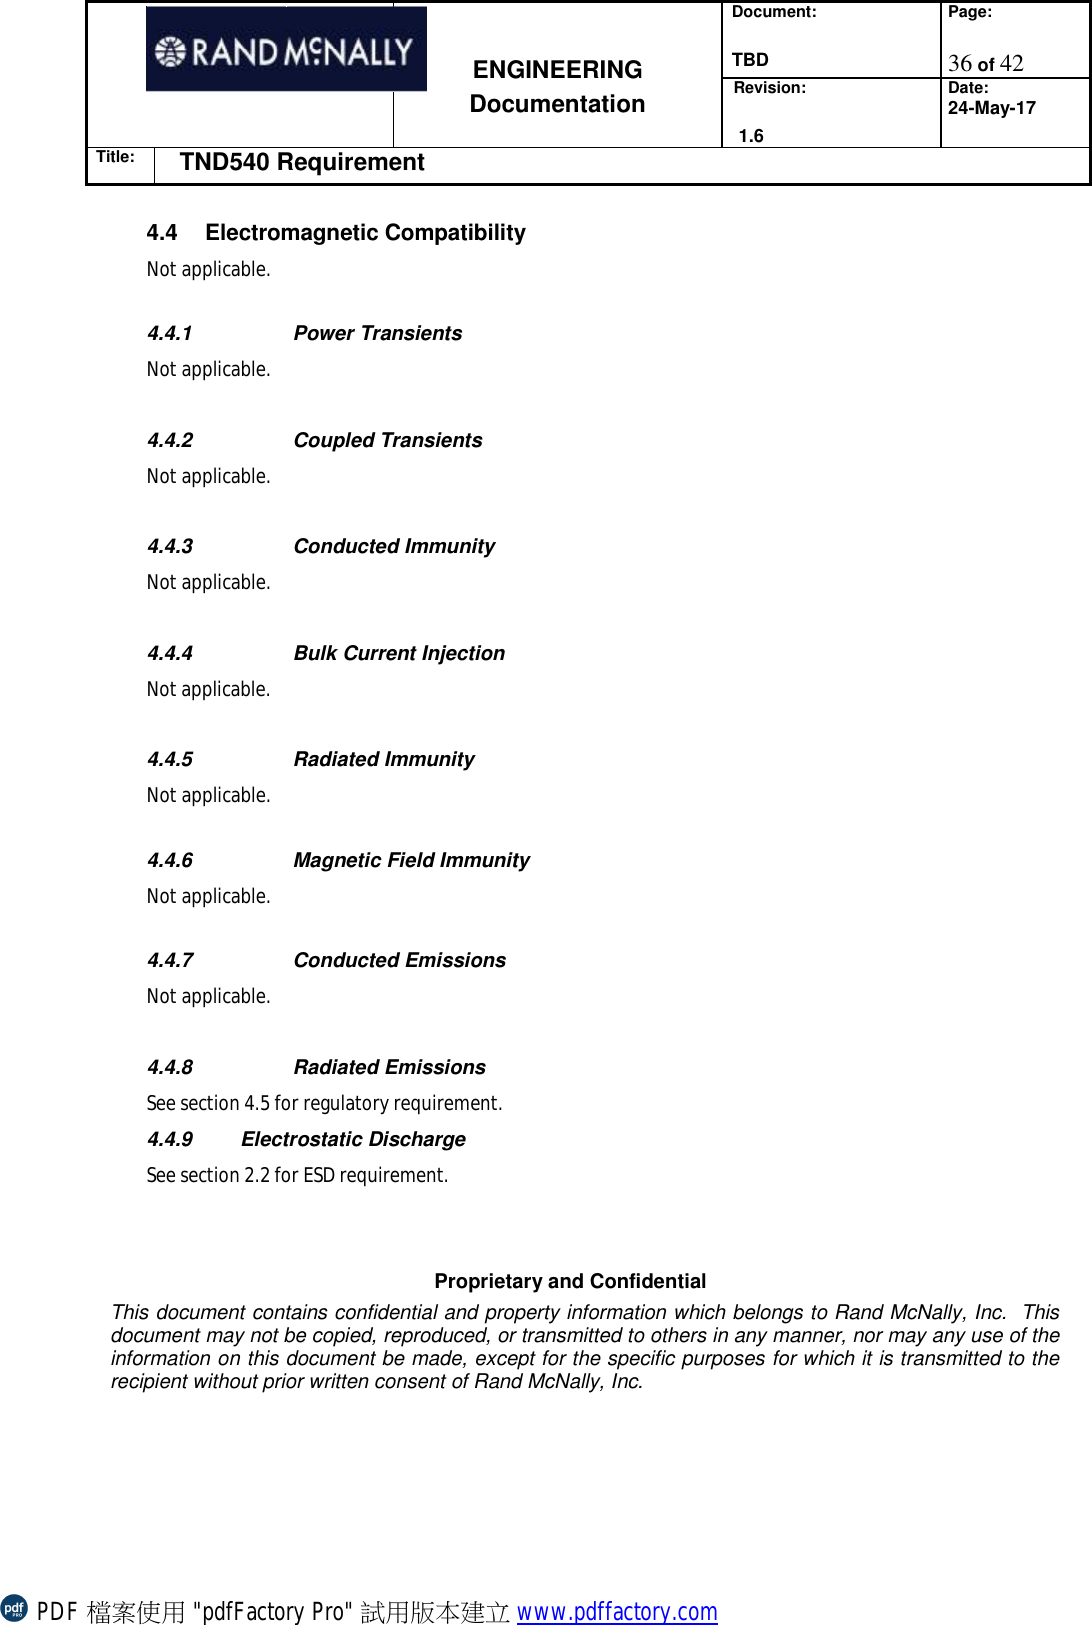 Document:  TBD Page:  36 of 42   ENGINEERING Documentation Revision:   1.6 Date: 24-May-17 Title: TND540 Requirement  Proprietary and Confidential This document contains confidential and property information which belongs to Rand McNally, Inc.  This document may not be copied, reproduced, or transmitted to others in any manner, nor may any use of the information on this document be made, except for the specific purposes for which it is transmitted to the recipient without prior written consent of Rand McNally, Inc.   4.4 Electromagnetic Compatibility  Not applicable.   4.4.1   Power Transients Not applicable.     4.4.2  Coupled Transients  Not applicable.     4.4.3  Conducted Immunity Not applicable.     4.4.4   Bulk Current Injection Not applicable.     4.4.5  Radiated Immunity Not applicable.  4.4.6  Magnetic Field Immunity   Not applicable.  4.4.7   Conducted Emissions Not applicable.  4.4.8   Radiated Emissions See section 4.5 for regulatory requirement.  4.4.9  Electrostatic Discharge  See section 2.2 for ESD requirement.   PDF 檔案使用 &quot;pdfFactory Pro&quot; 試用版本建立 www.pdffactory.com